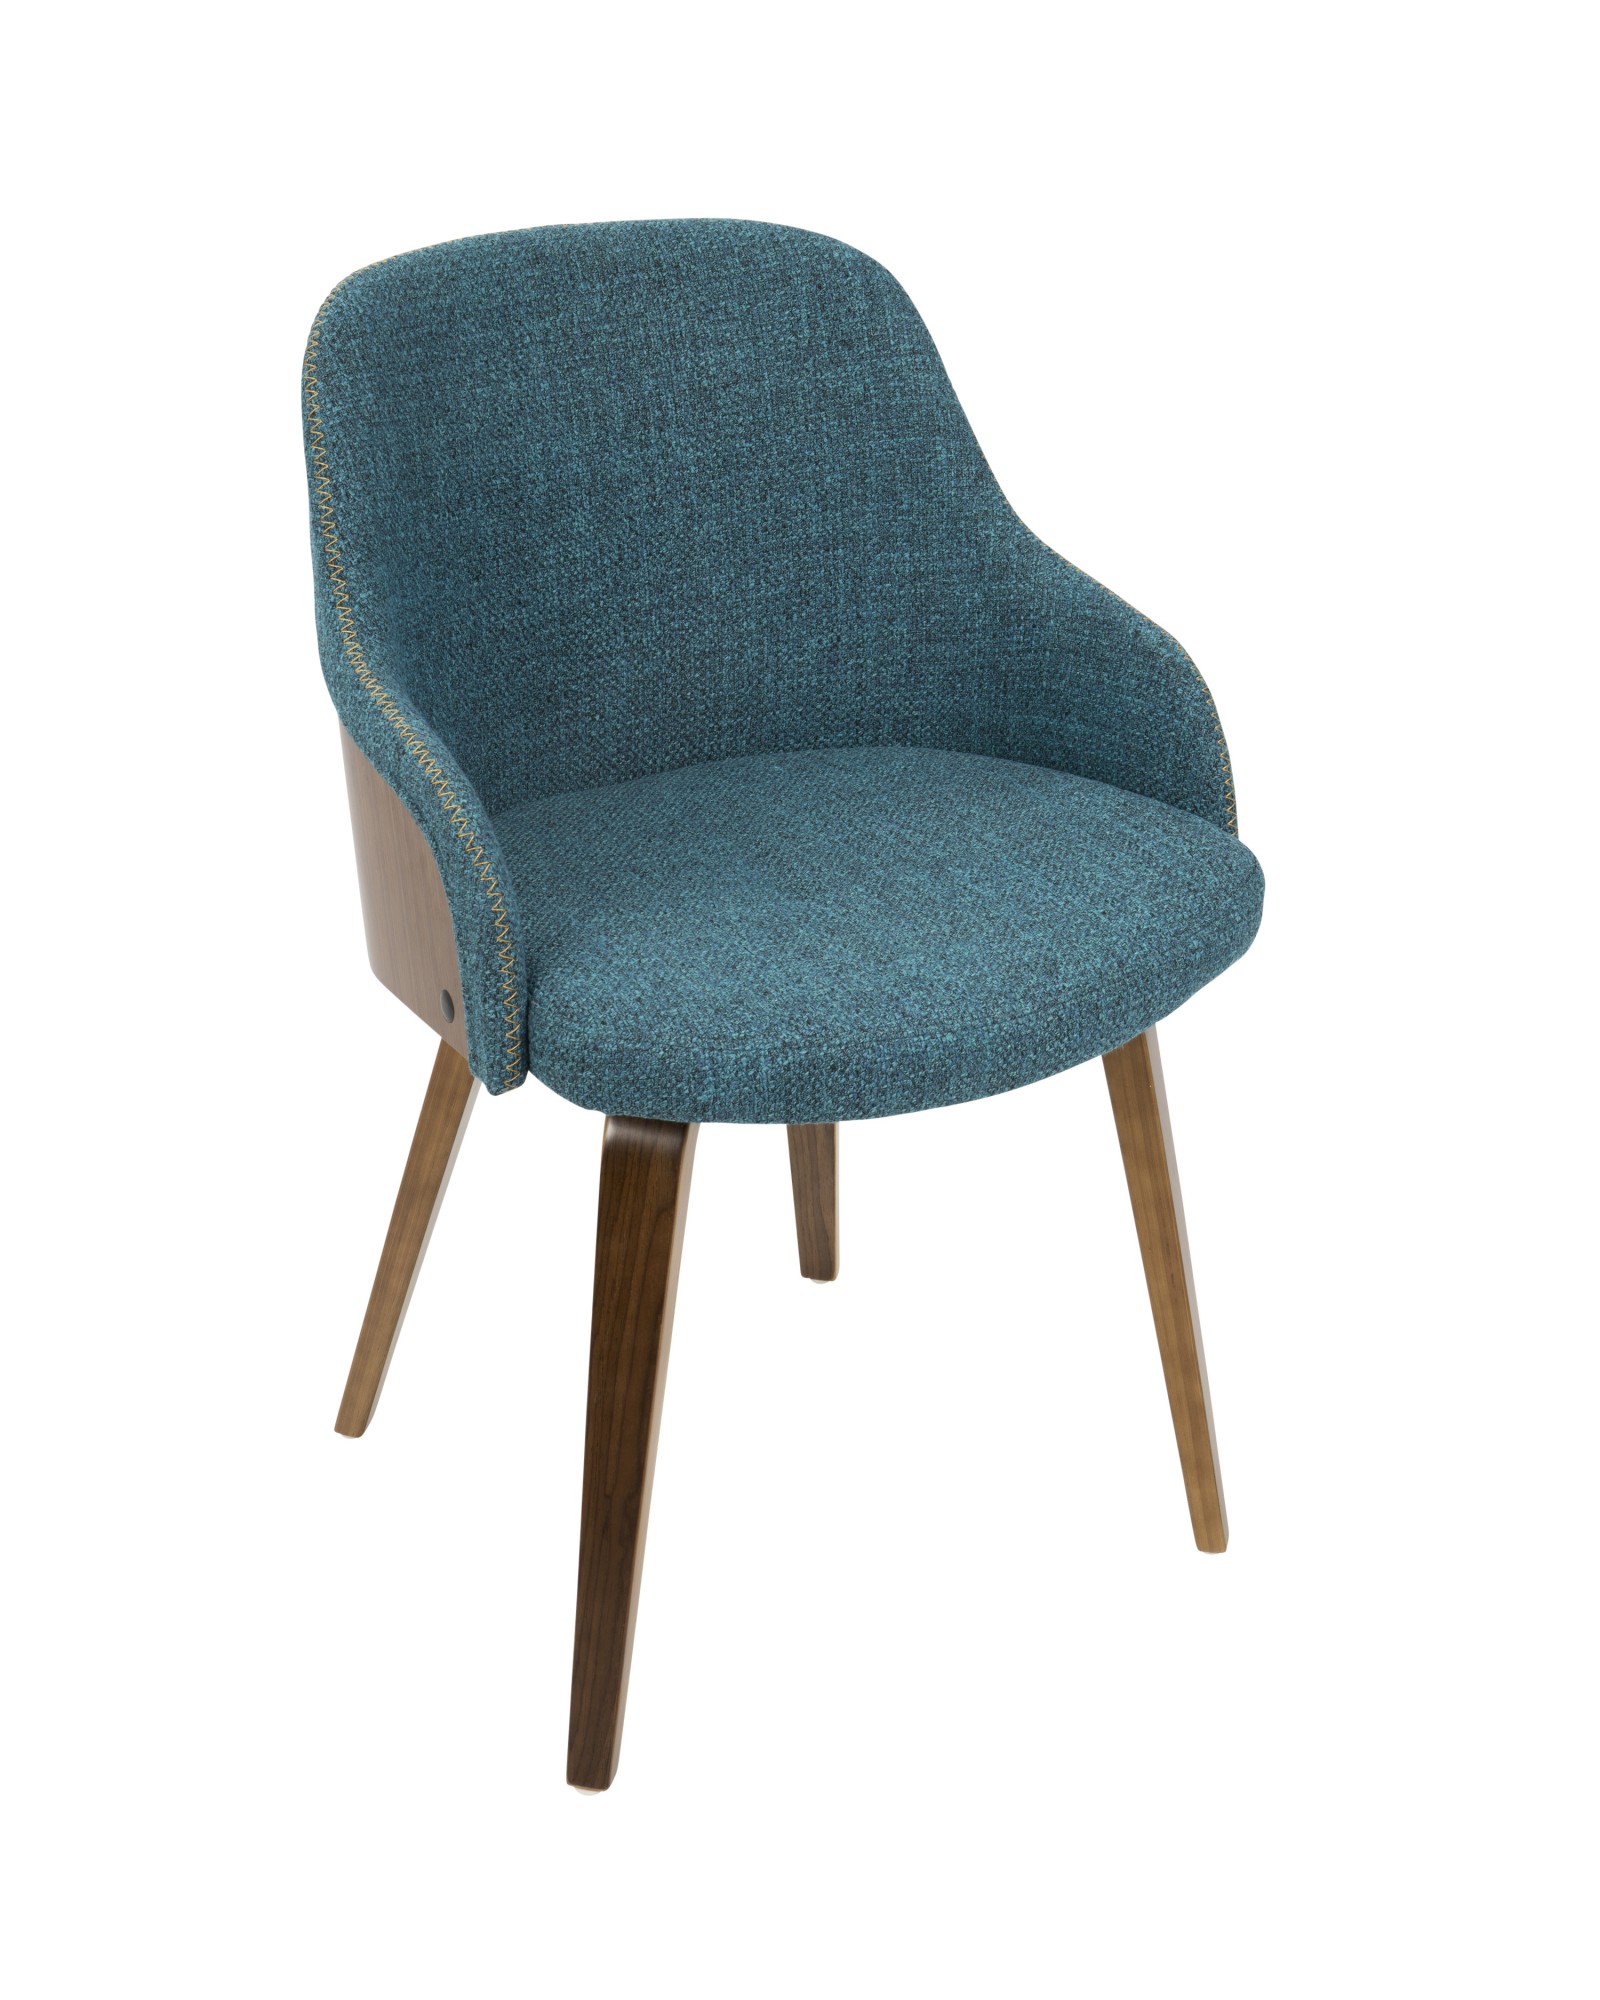 Bacci Mid-Century Modern Dining/ Accent Chair in Walnut Wood and Teal Fabric